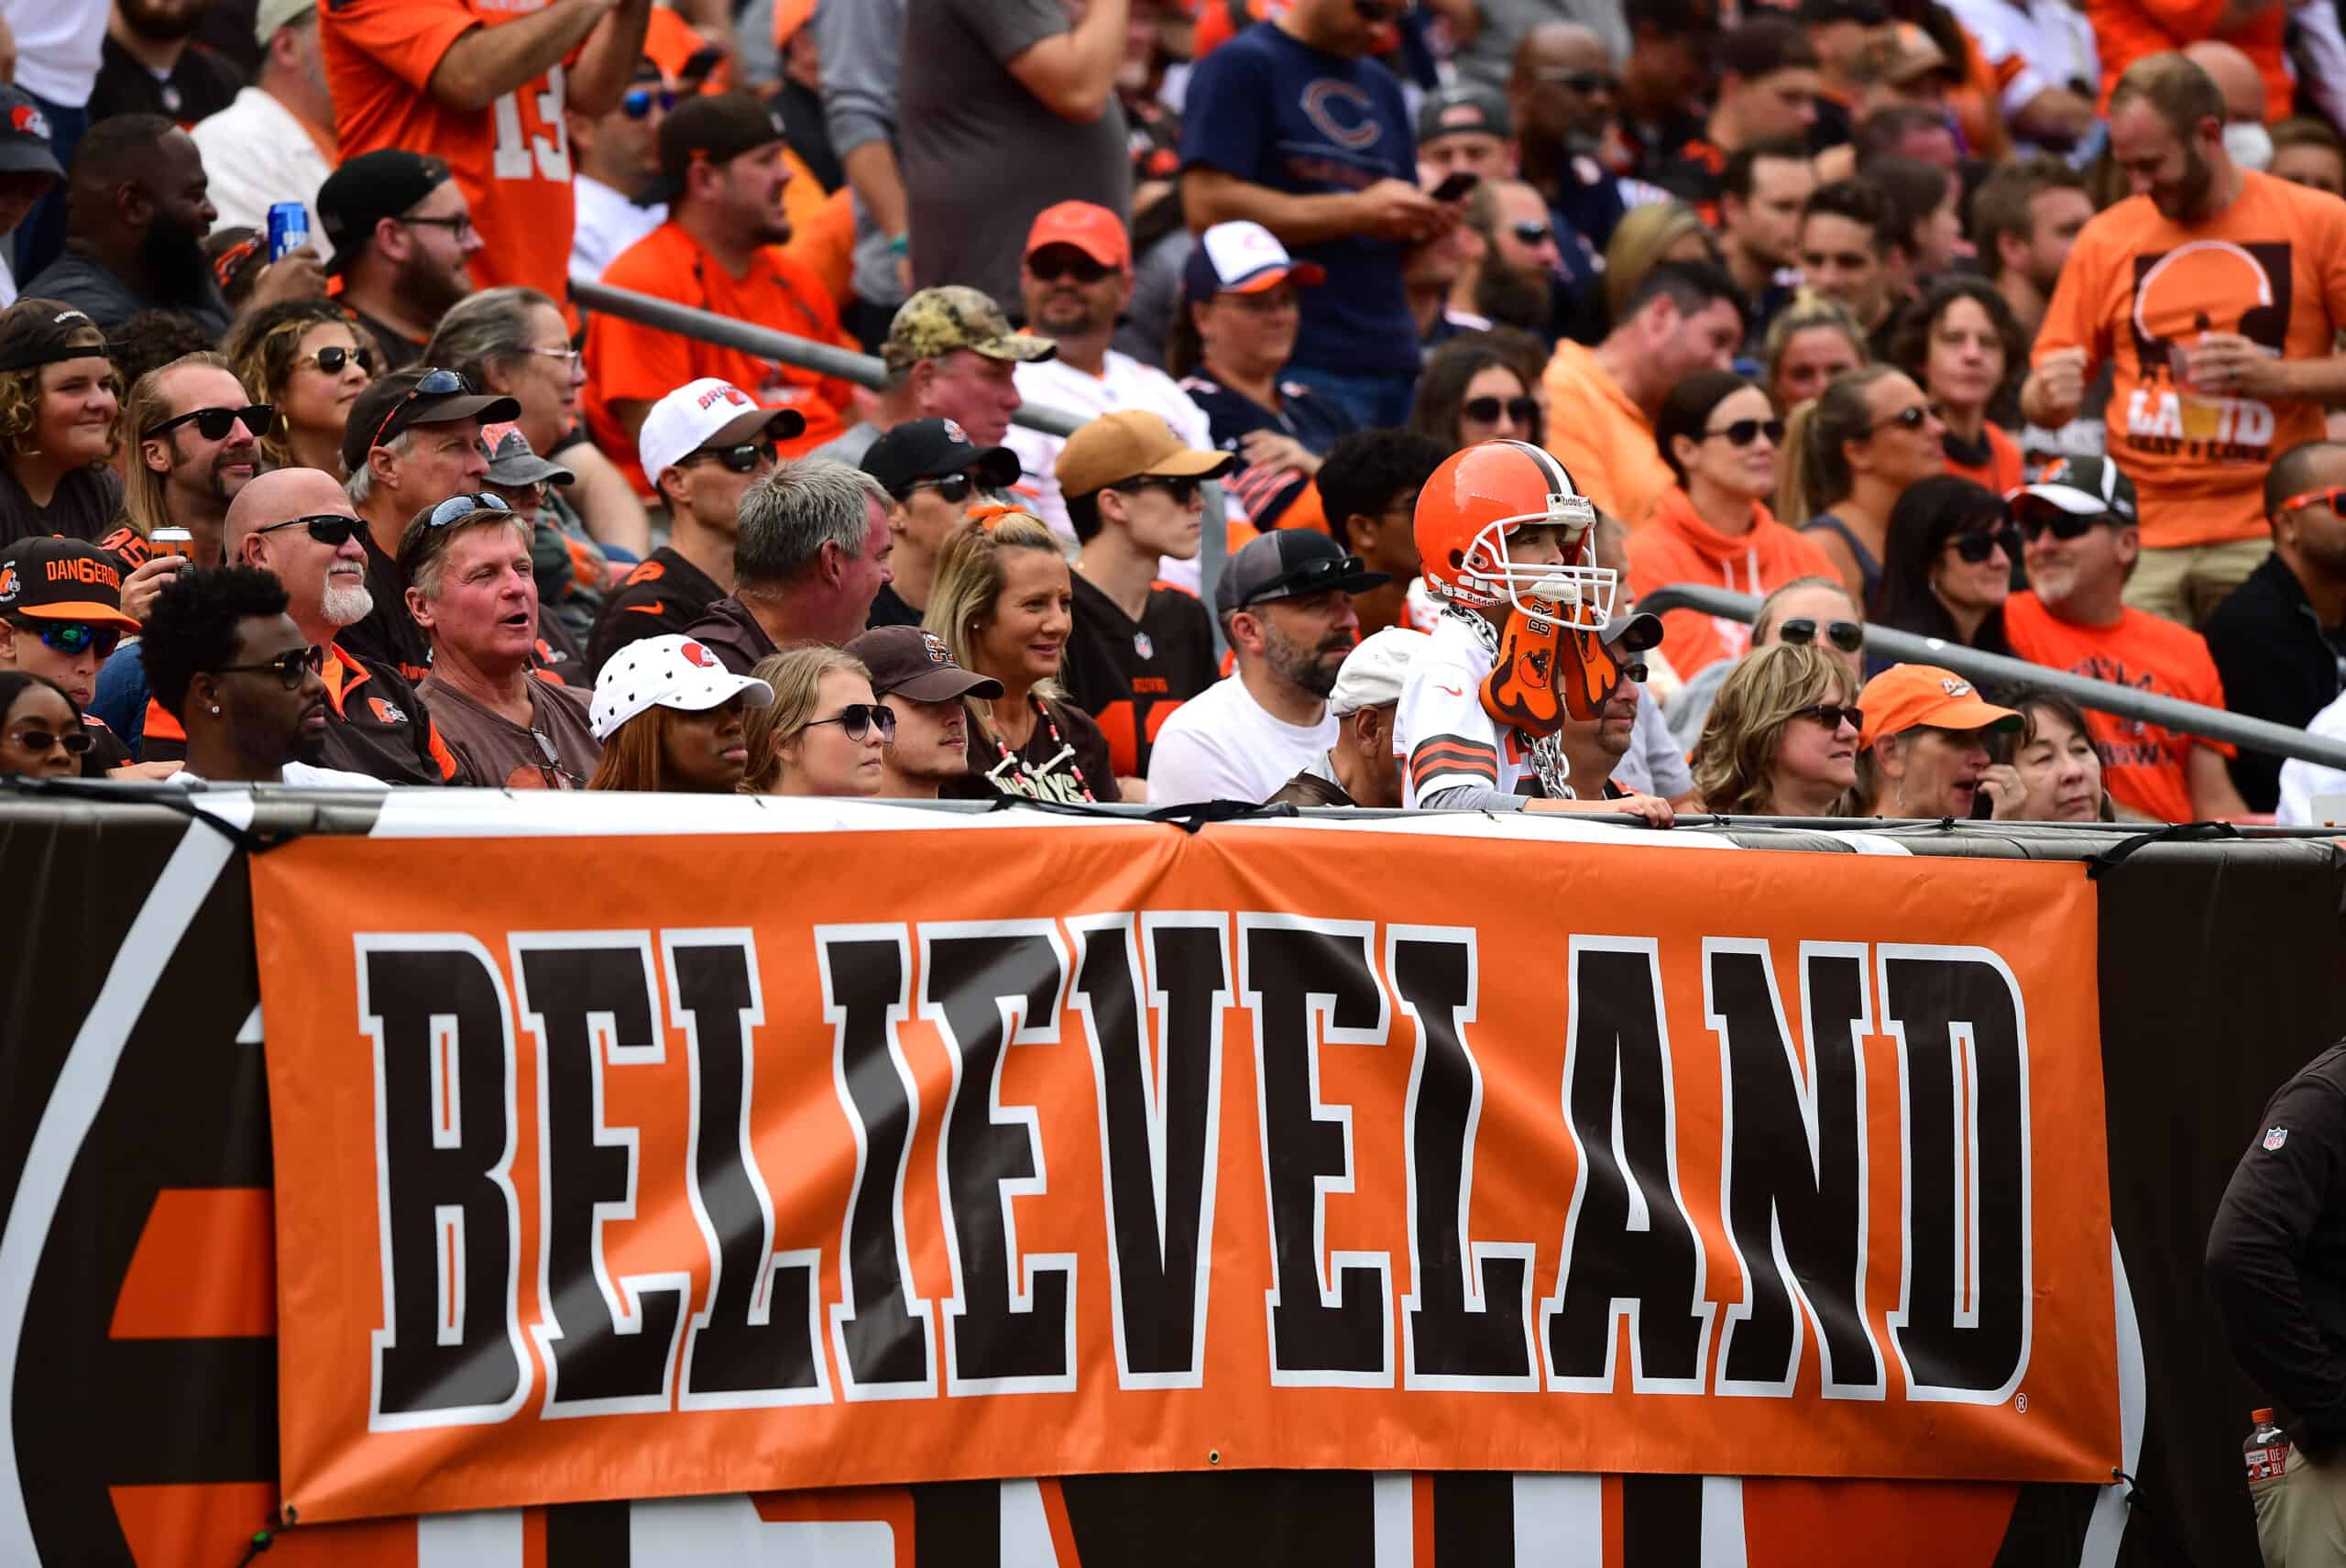 Cleveland Browns fans in the stands during the game against the Chicago Bears at FirstEnergy Stadium on September 26, 2021 in Cleveland, Ohio. 